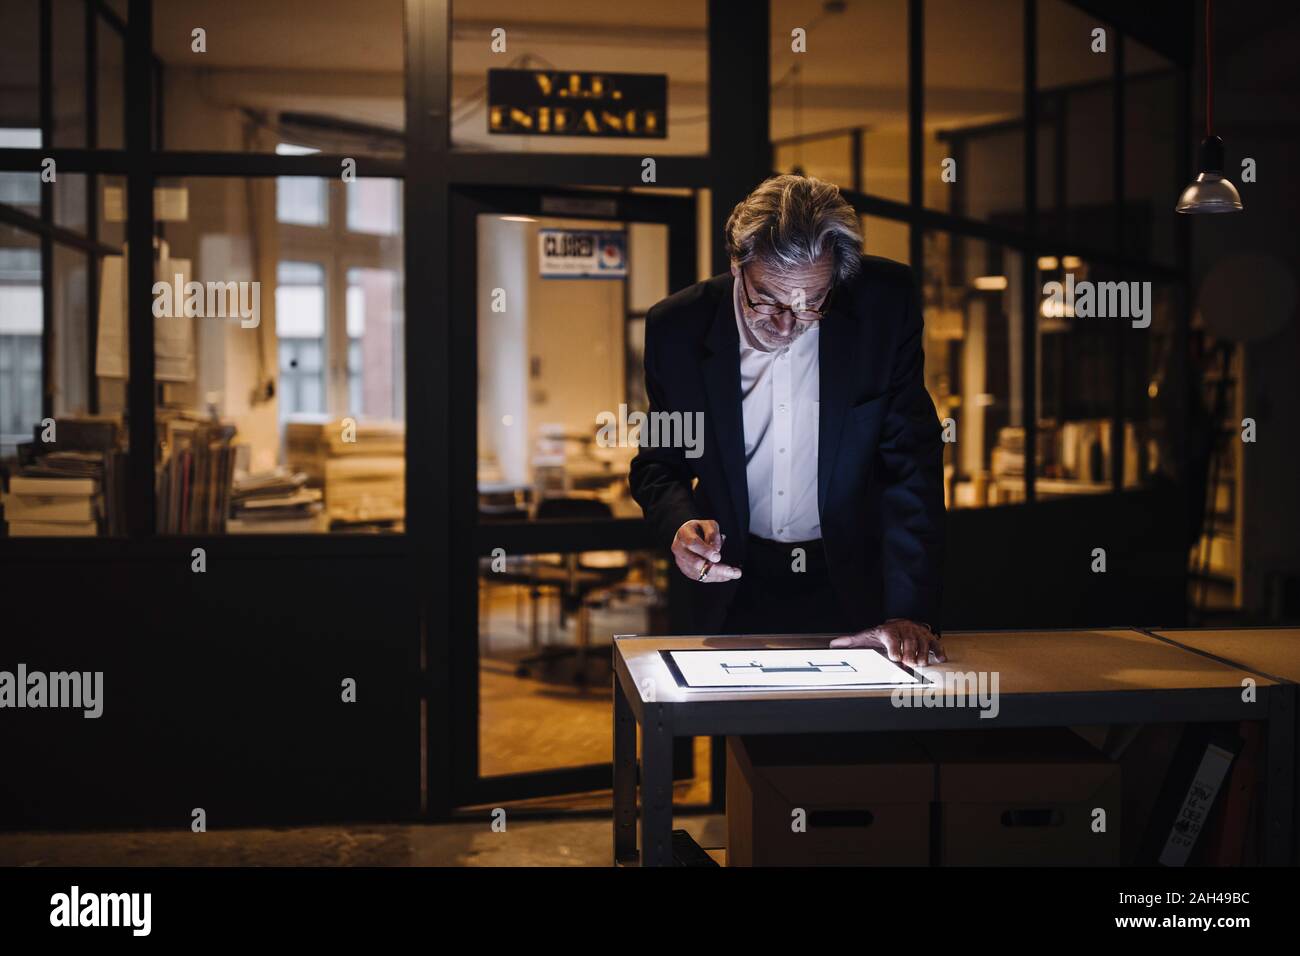 Senior businessman looking at shining tablet in office Banque D'Images